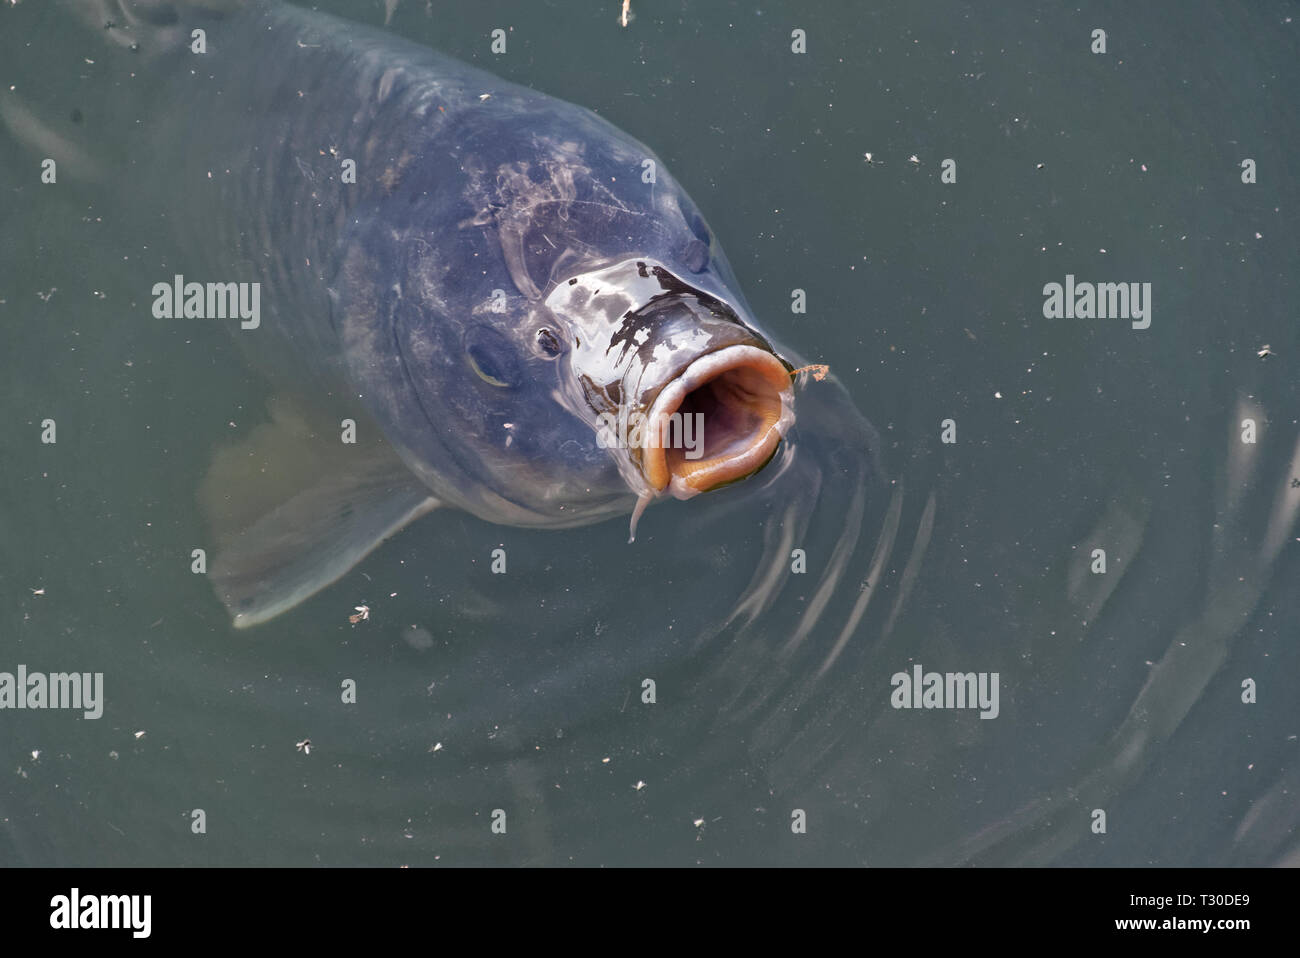 Common carp or European carp (Cyprinus carpio) is a widespread freshwater fish of eutrophic waters in lakes and large rivers in Europe and Asia. Stock Photo